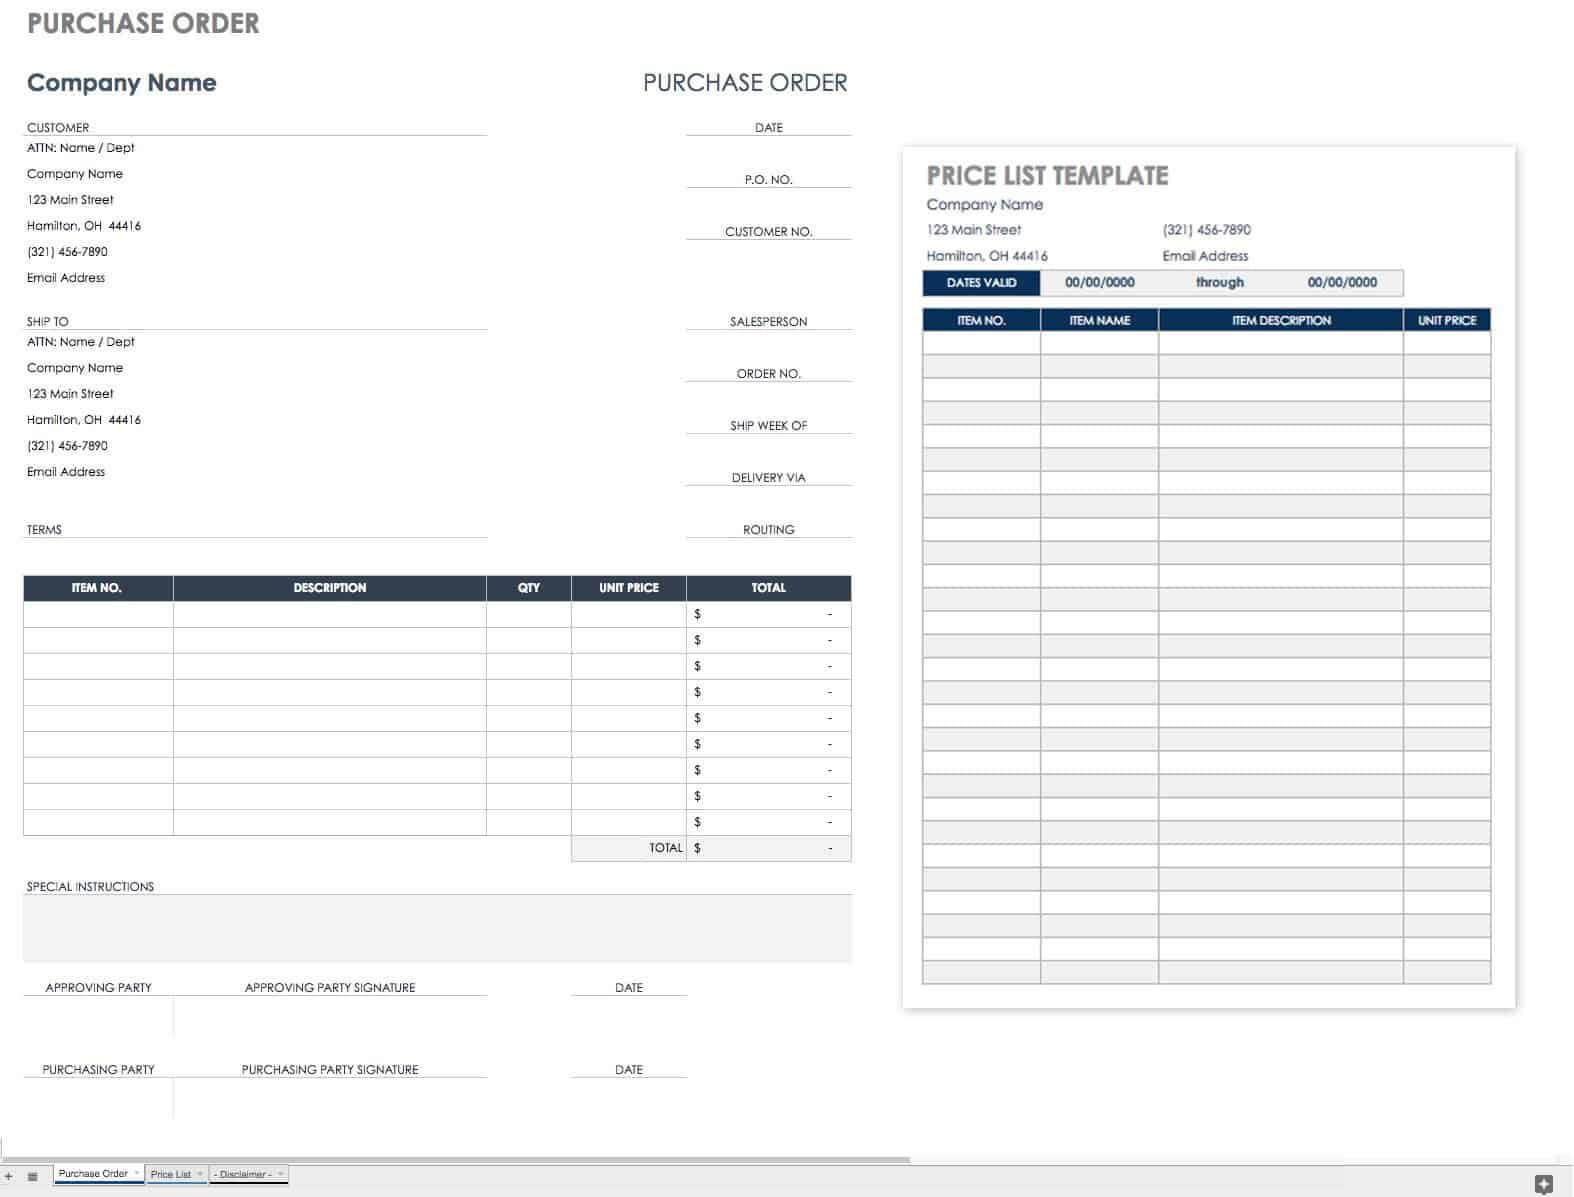 Free Purchase Order Templates | Smartsheet Within Blank Money Order Template